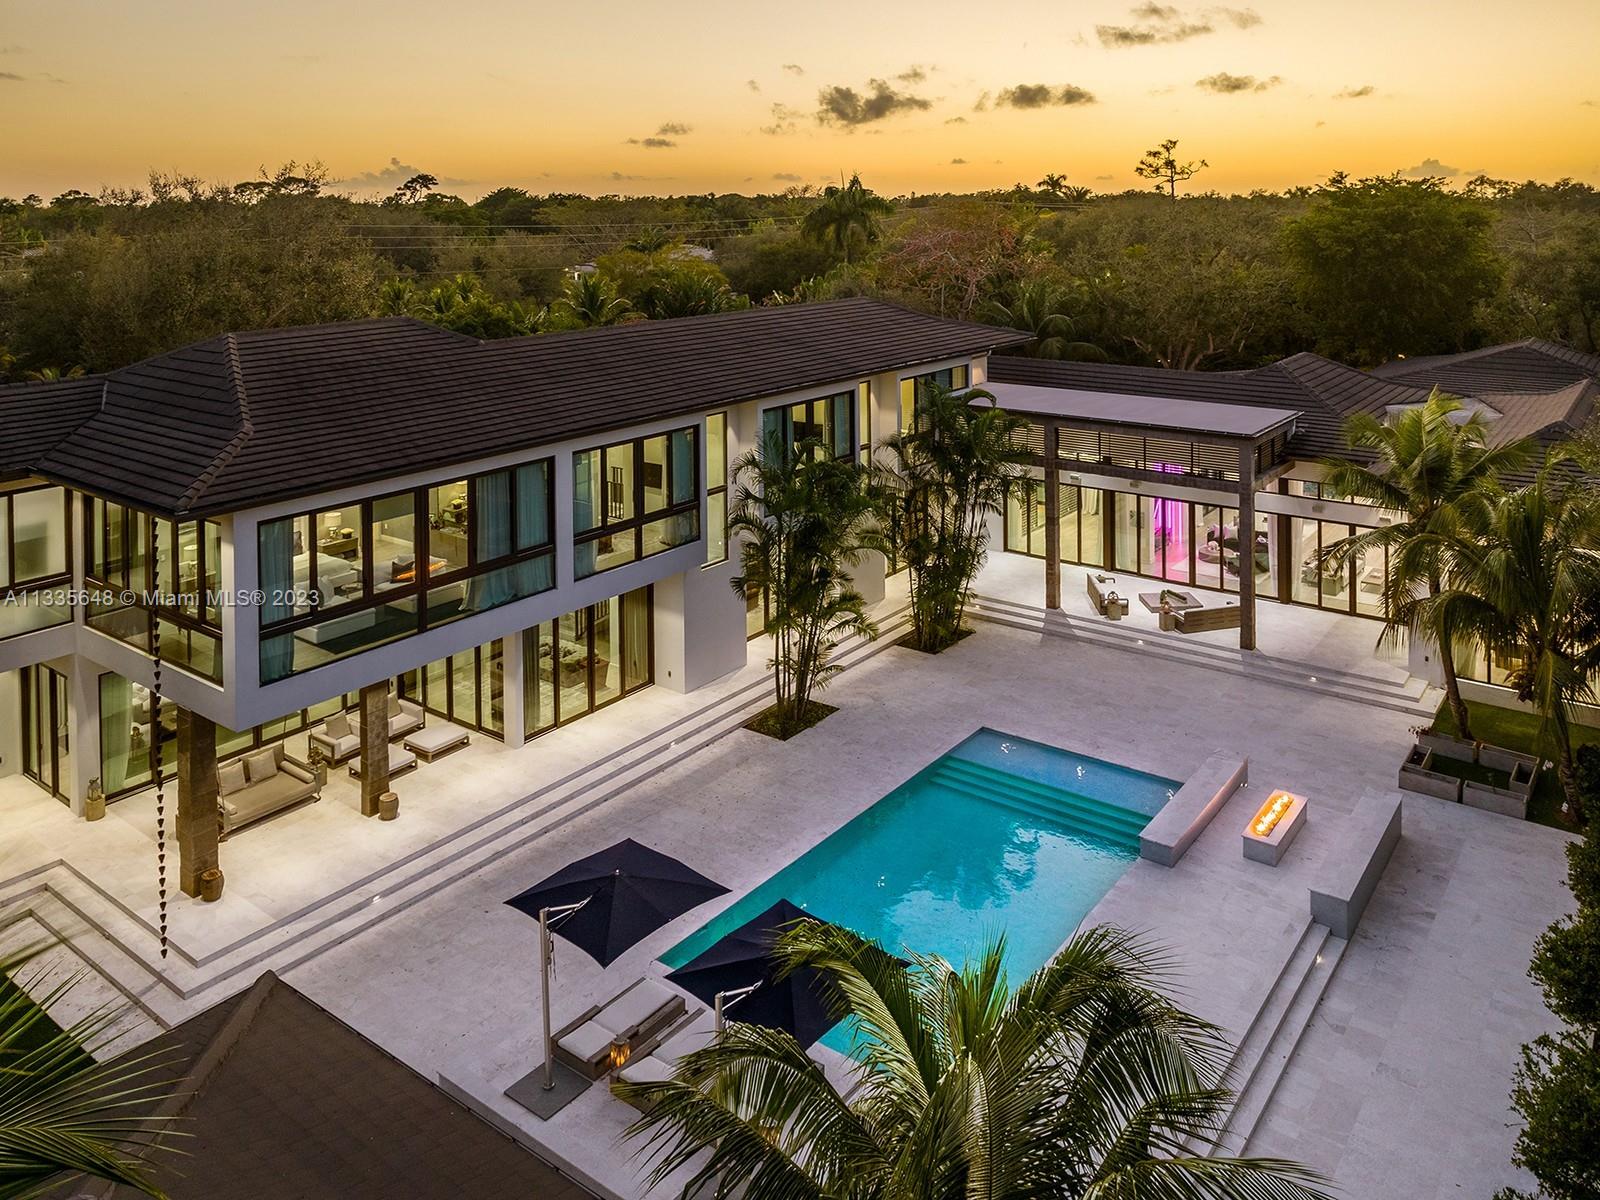 Modern Style meets unmatched elegance in this tropical paradise in N Pinecrest. This exquisite 2019 custom estate sits on over an acre & greets you w/multiple water features, grand foyer, volume ceilings & flr to ceiling white linen draperies. Unique open plan offering panoramic views of the outdrs from great rm. Quintessential kitchen by Officine Gullo w/walk-in pantry & Wolf/SubZero appl. This estate has it all w/state-of-the-art video & surround sound, home theatre, & sports bar rm. Bi-Level bedrms w/private sitting rms downstairs. Lavish master ste w/boutique WIC, sitting area, spa bath w/floating tub & 16ft shower. Outdr oasis w/pool, spa, covered terr, summer kit, outdr shower. Other Feat: elevator, maids rm, generator, 3 fire pits, 3 car gar w/space for lifts, elite schools nearby.